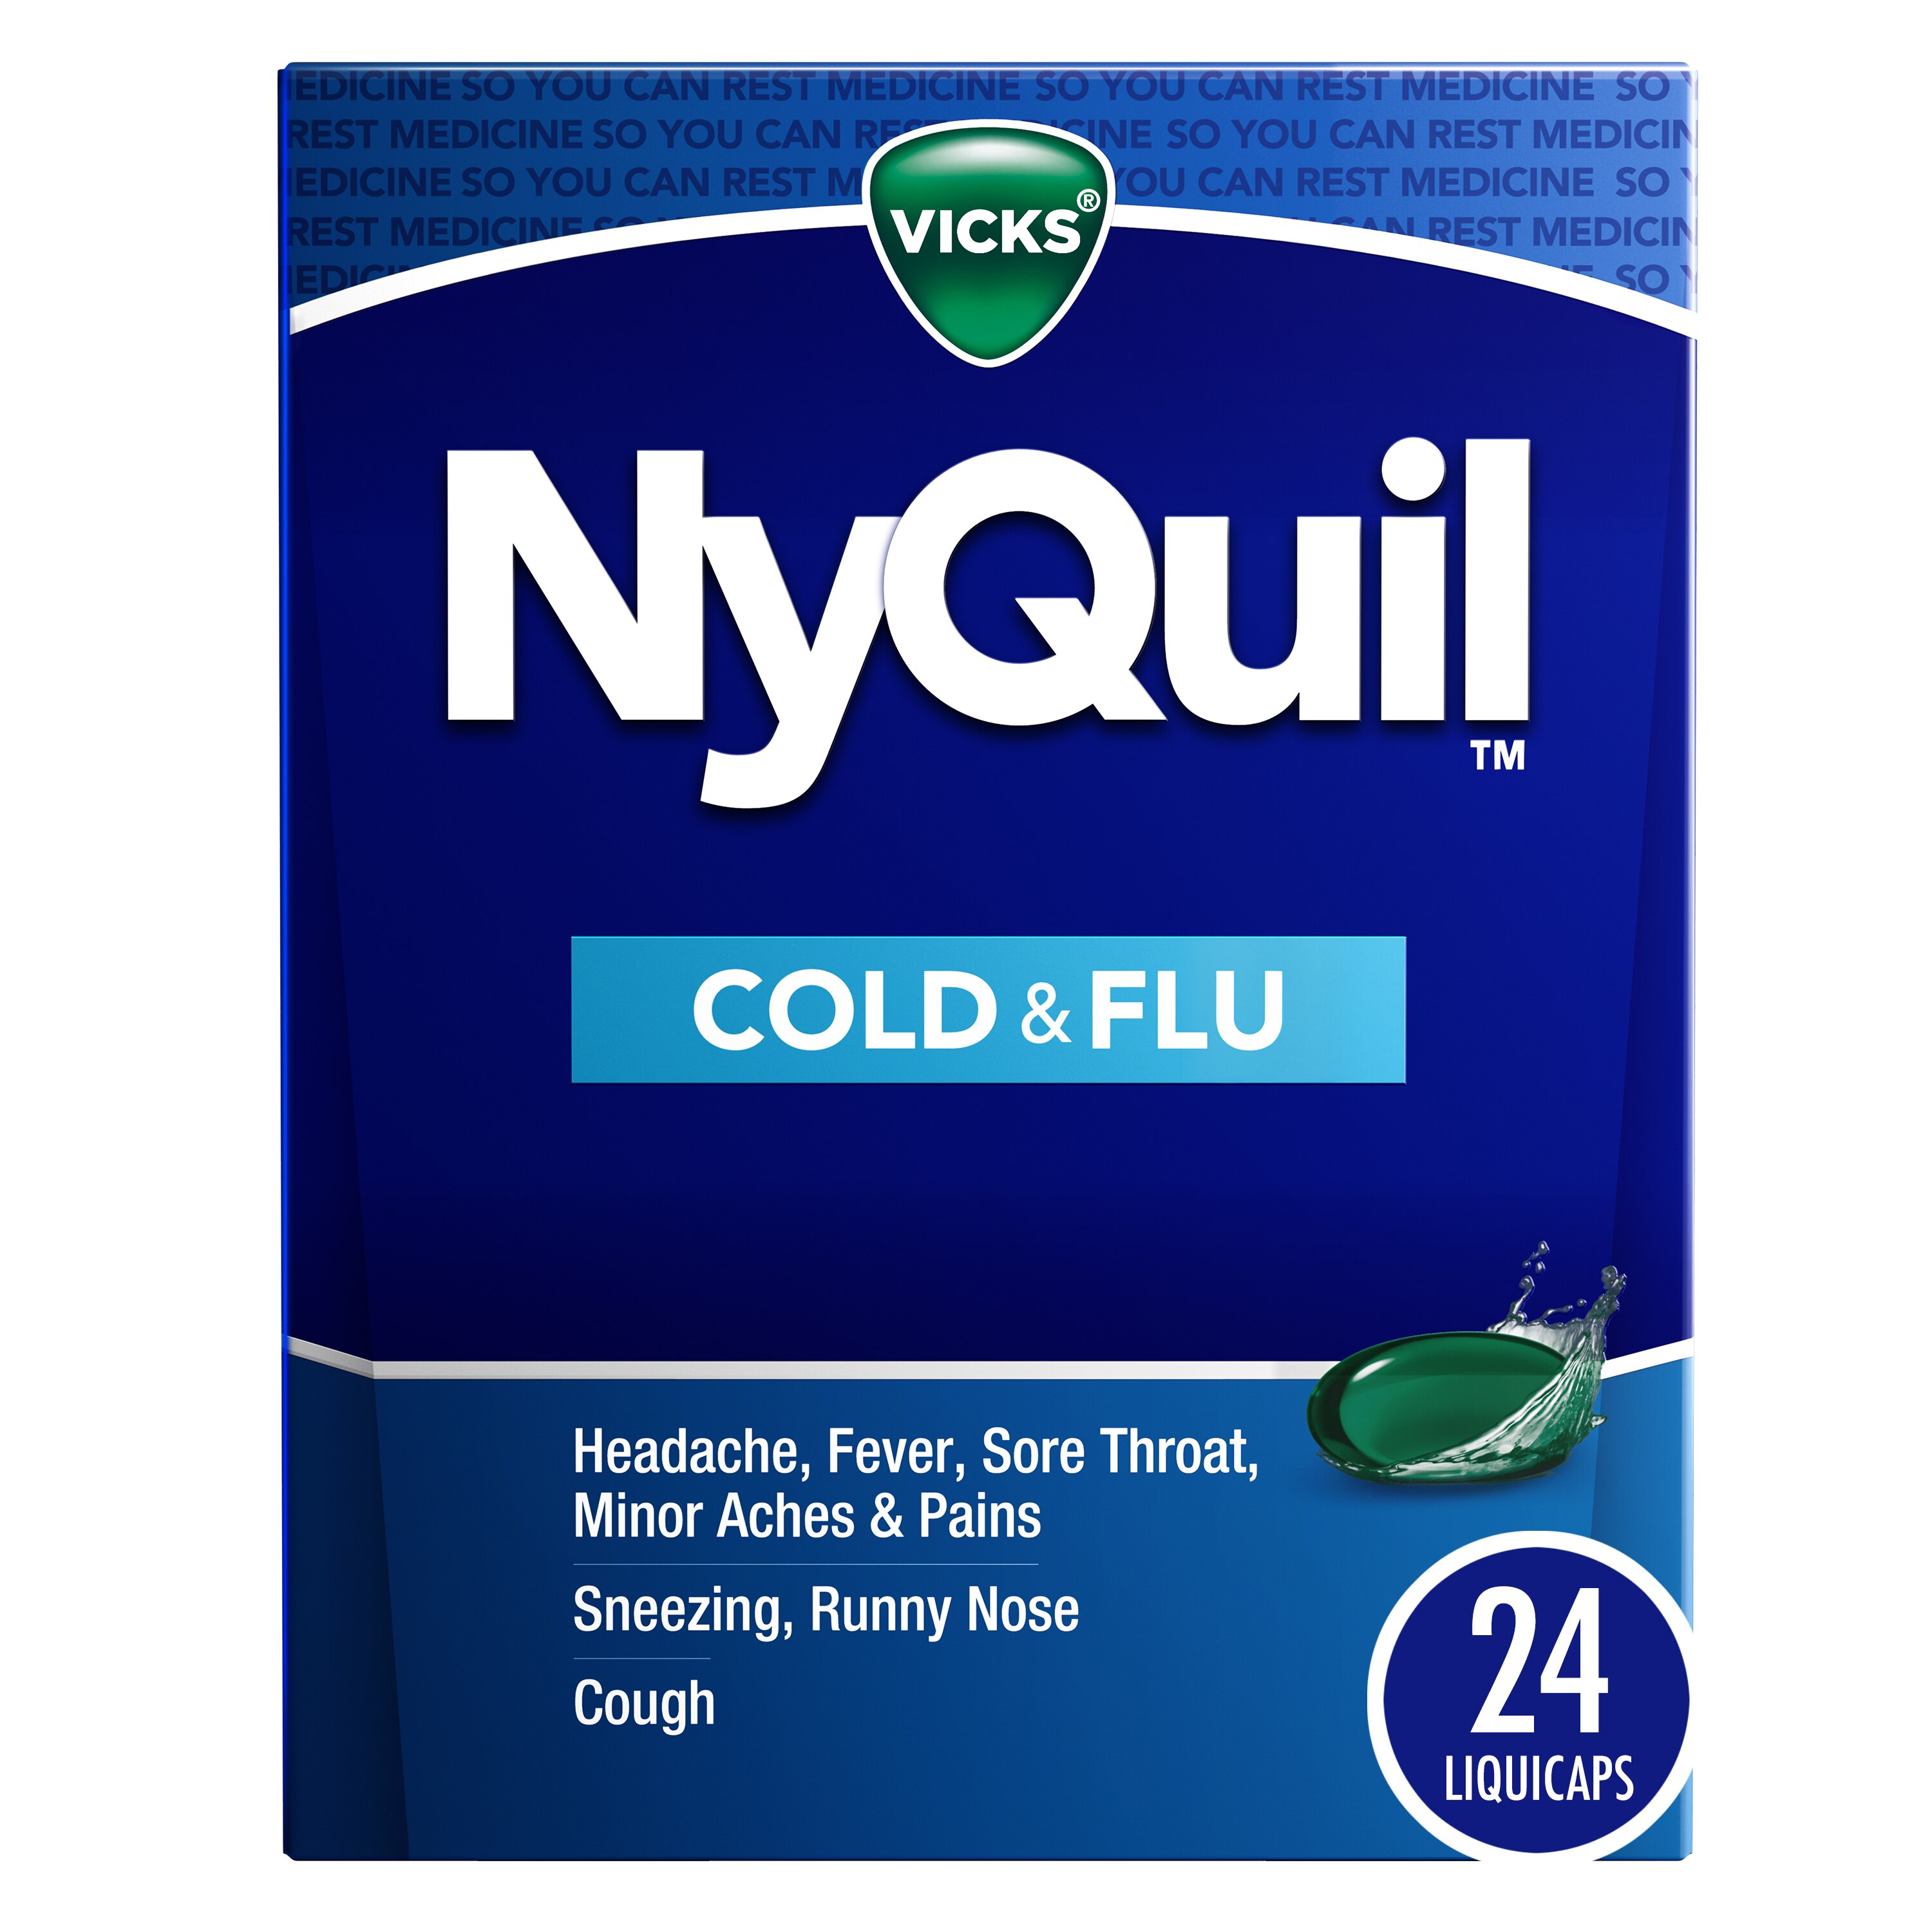 Vicks NyQuil Cold & Flu Relief LiquiCaps